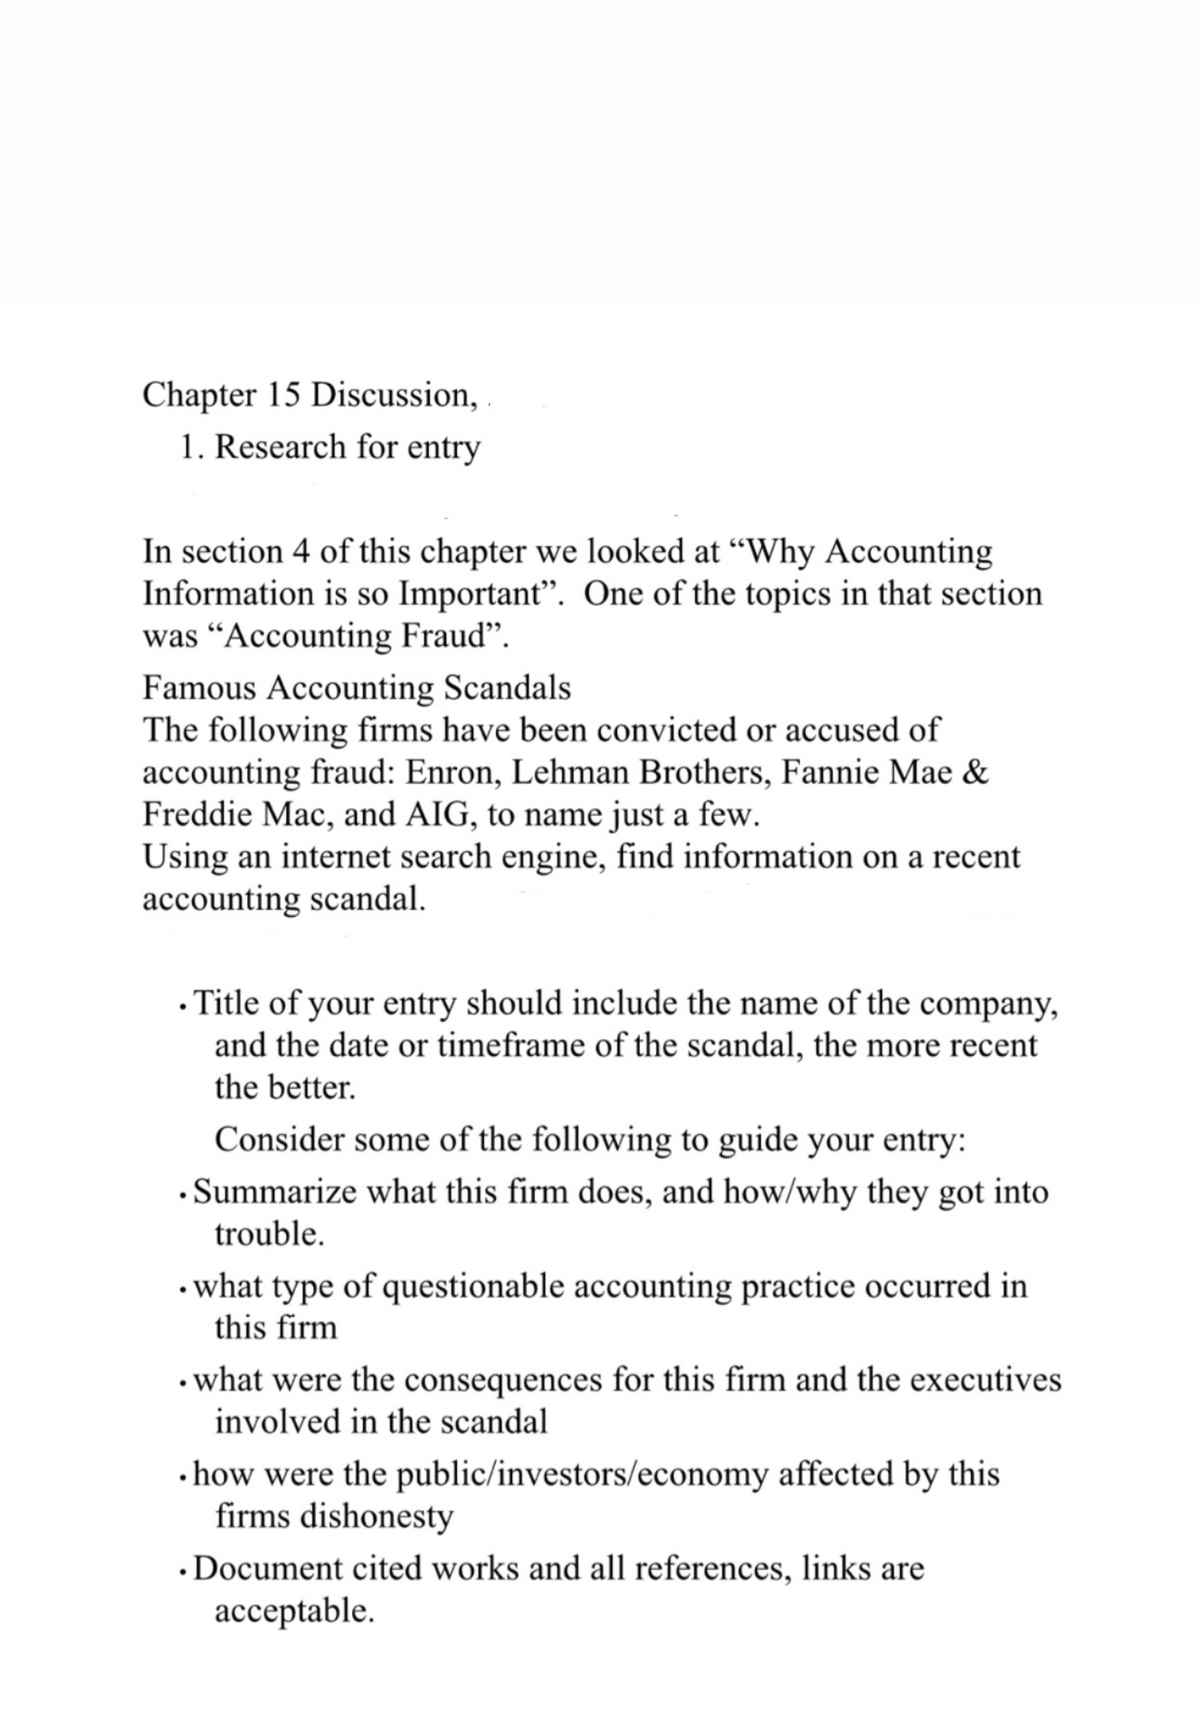 Chapter 15 Discussion,
1. Research for entry
In section 4 of this chapter we looked at “Why Accounting
Information is so Important". One of the topics in that section
was “Accounting Fraud".
Famous Accounting Scandals
The following firms have been convicted or accused of
accounting fraud: Enron, Lehman Brothers, Fannie Mae &
Freddie Mac, and AIG, to name just a few.
Using an internet search engine, find information on a recent
accounting scandal.
• Title of your entry should include the name of the company,
and the date or timeframe of the scandal, the more recent
the better.
Consider some of the following to guide your entry:
• Summarize what this firm does, and how/why they got into
trouble.
• what type of questionable accounting practice occurred in
this firm
• what were the consequences for this firm and the executives
involved in the scandal
• how were the public/investors/economy affected by this
firms dishonesty
• Document cited works and all references, links are
ассеptable.
